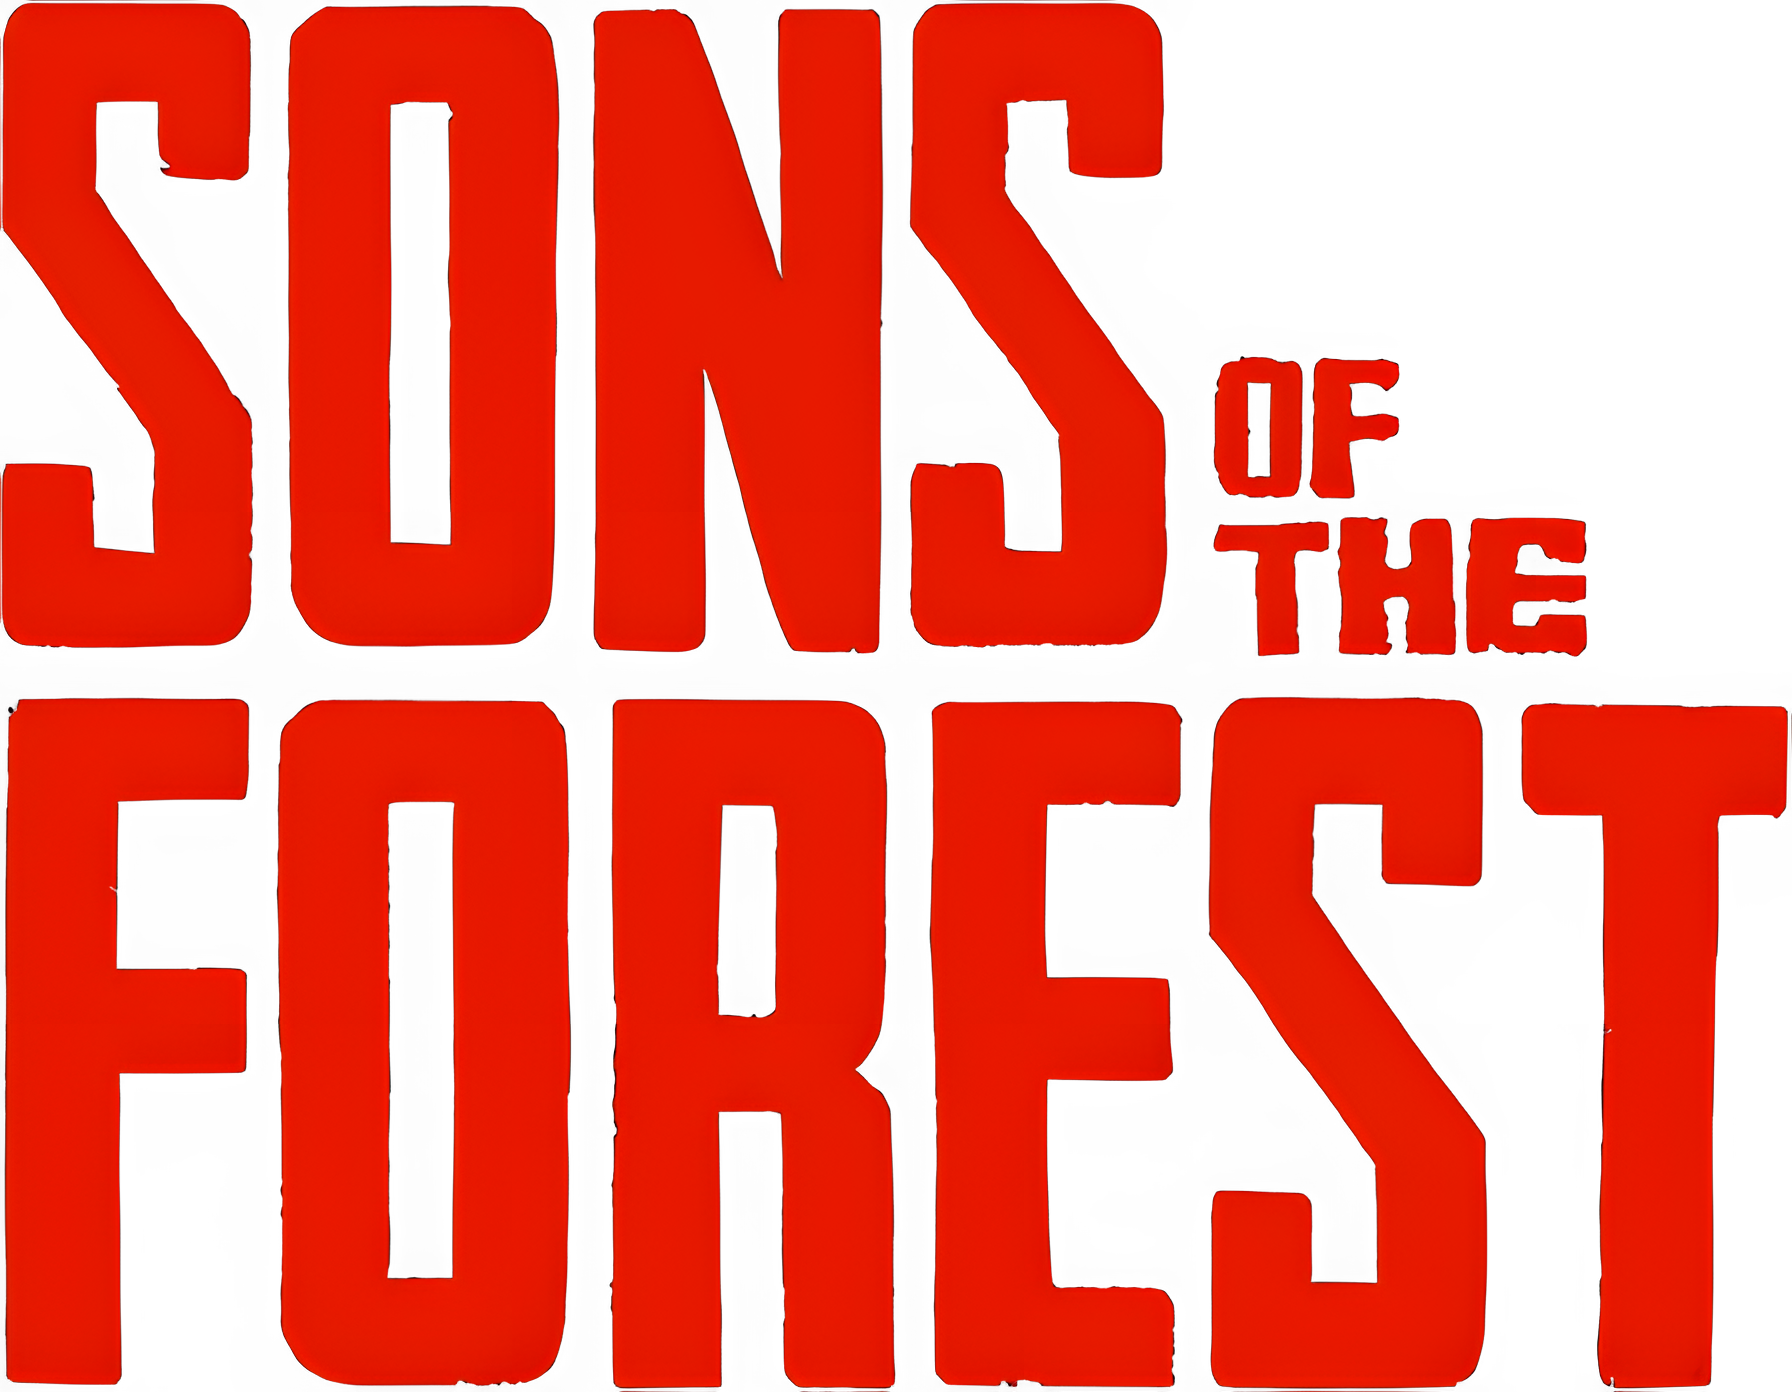 Sons Of The Forest - Download